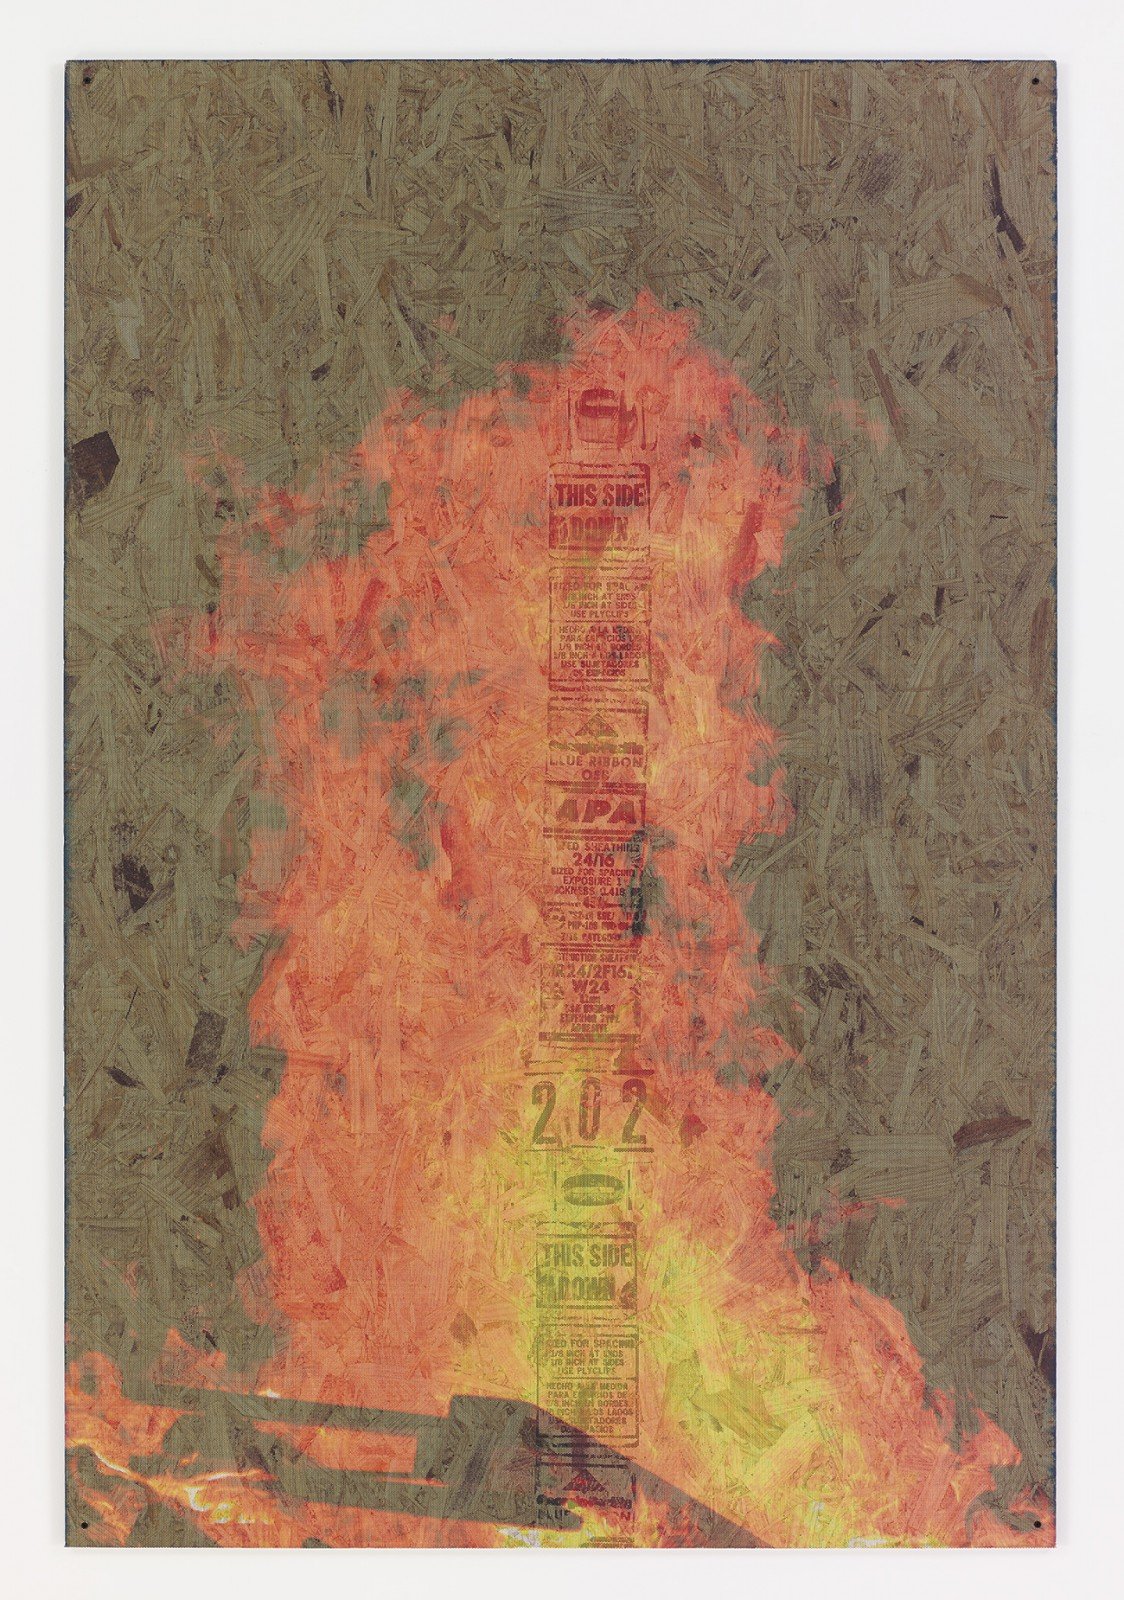 Peter Sutherland, Bonfire 4, 2014. Inkjet on perforated vinyl adhered to OSB, 72 x 48 inches.